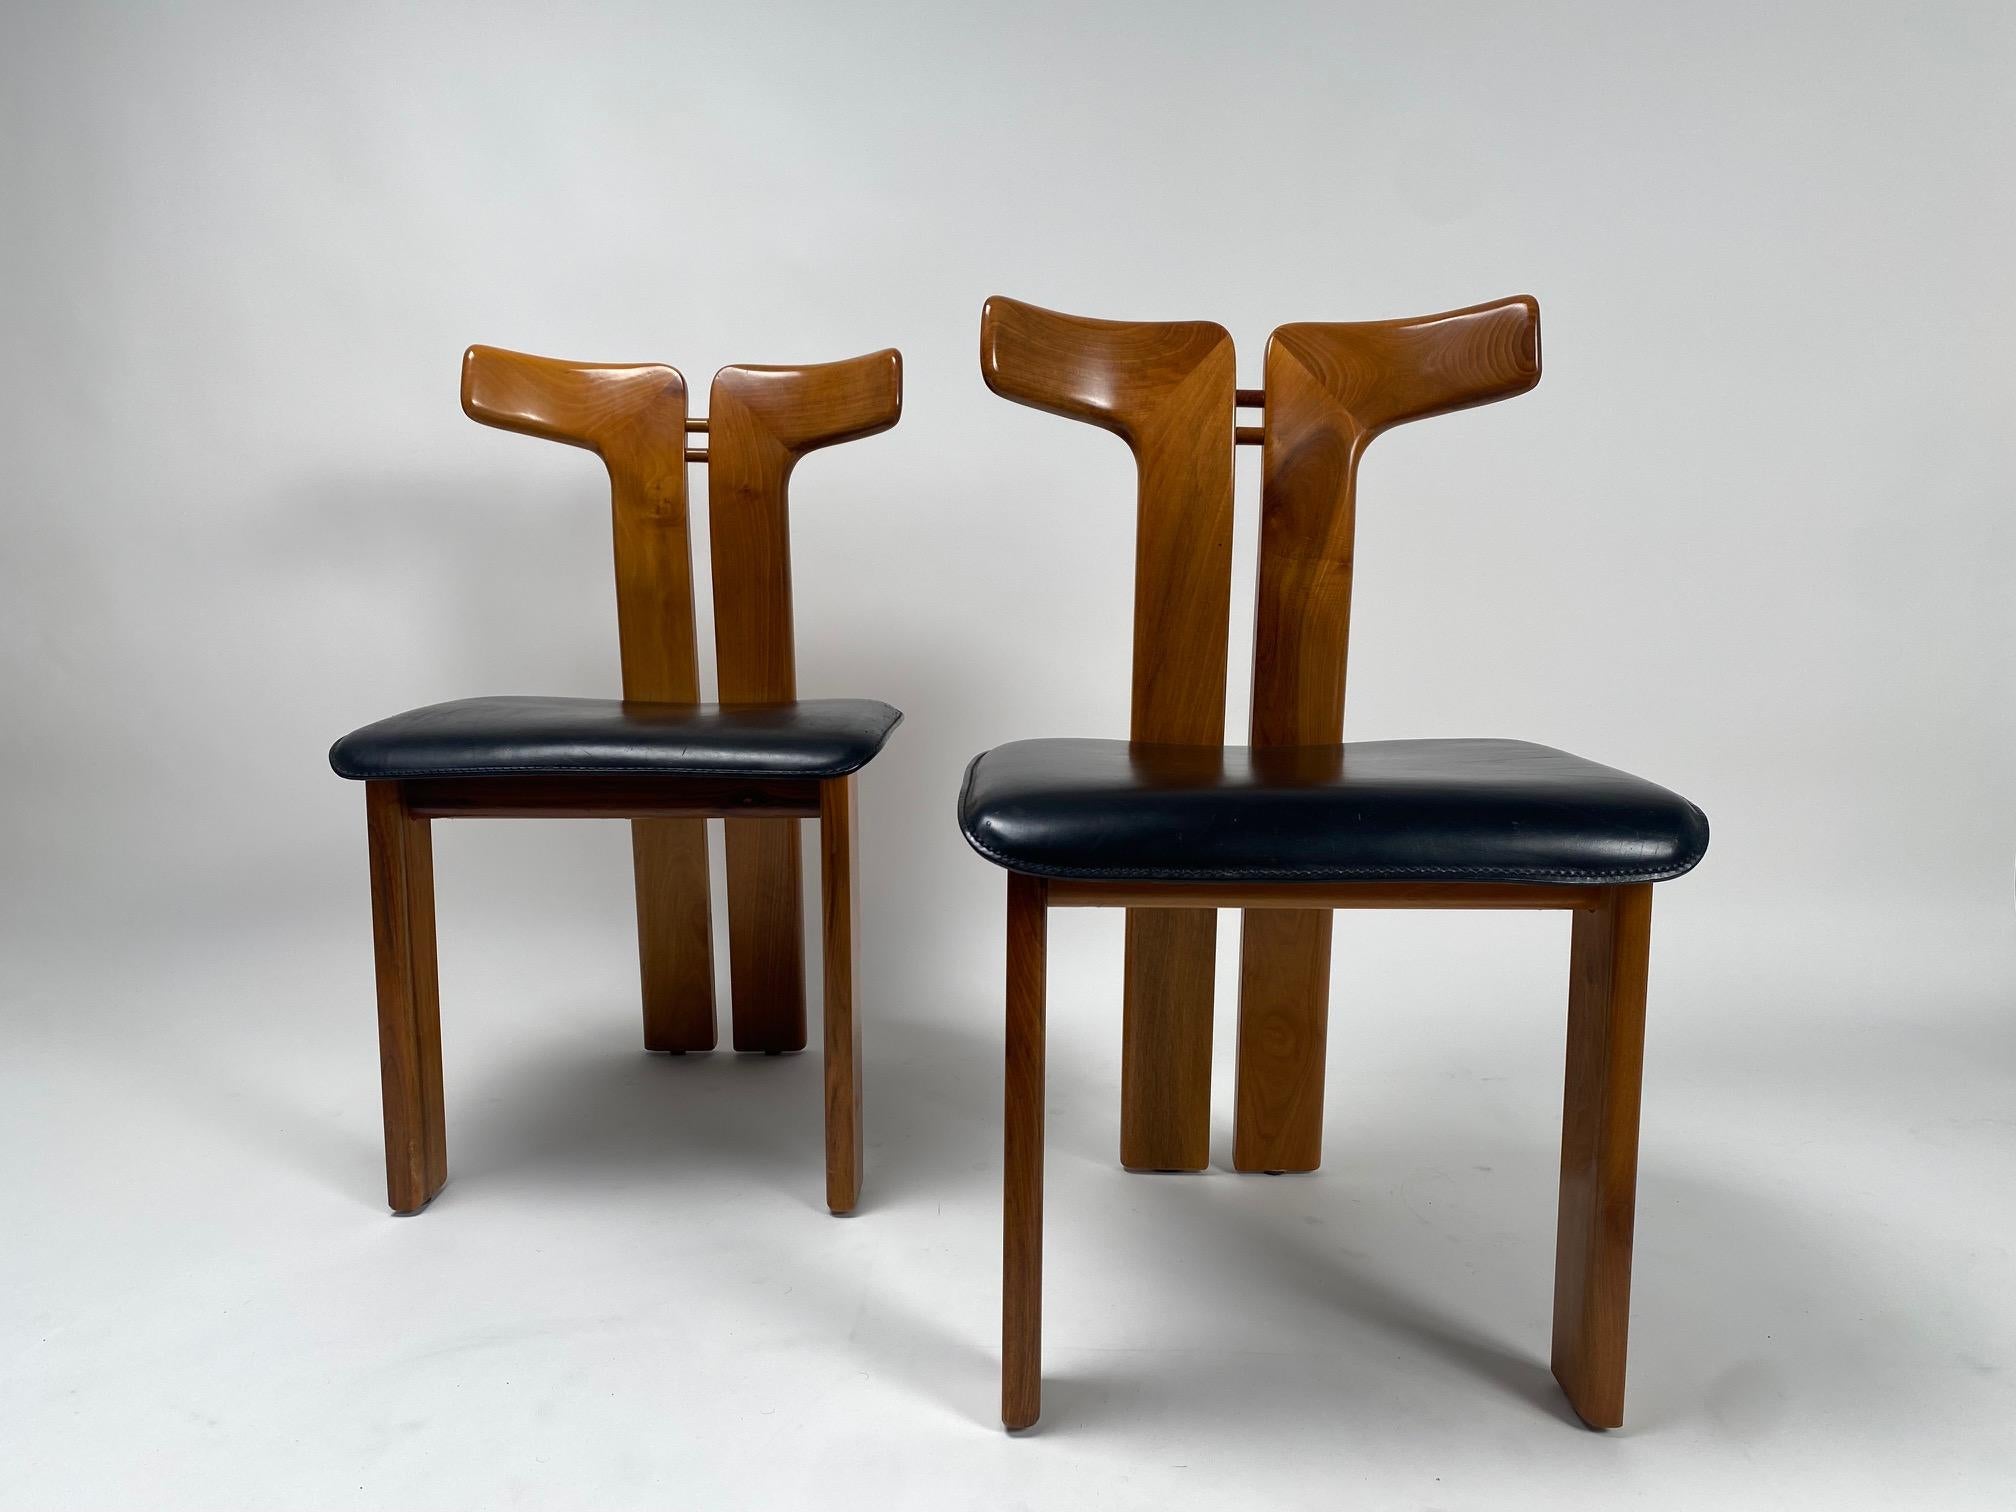 Pierre Cardin, 6 Dining Chairs in Walnut and Leather, 1970s For Sale 5